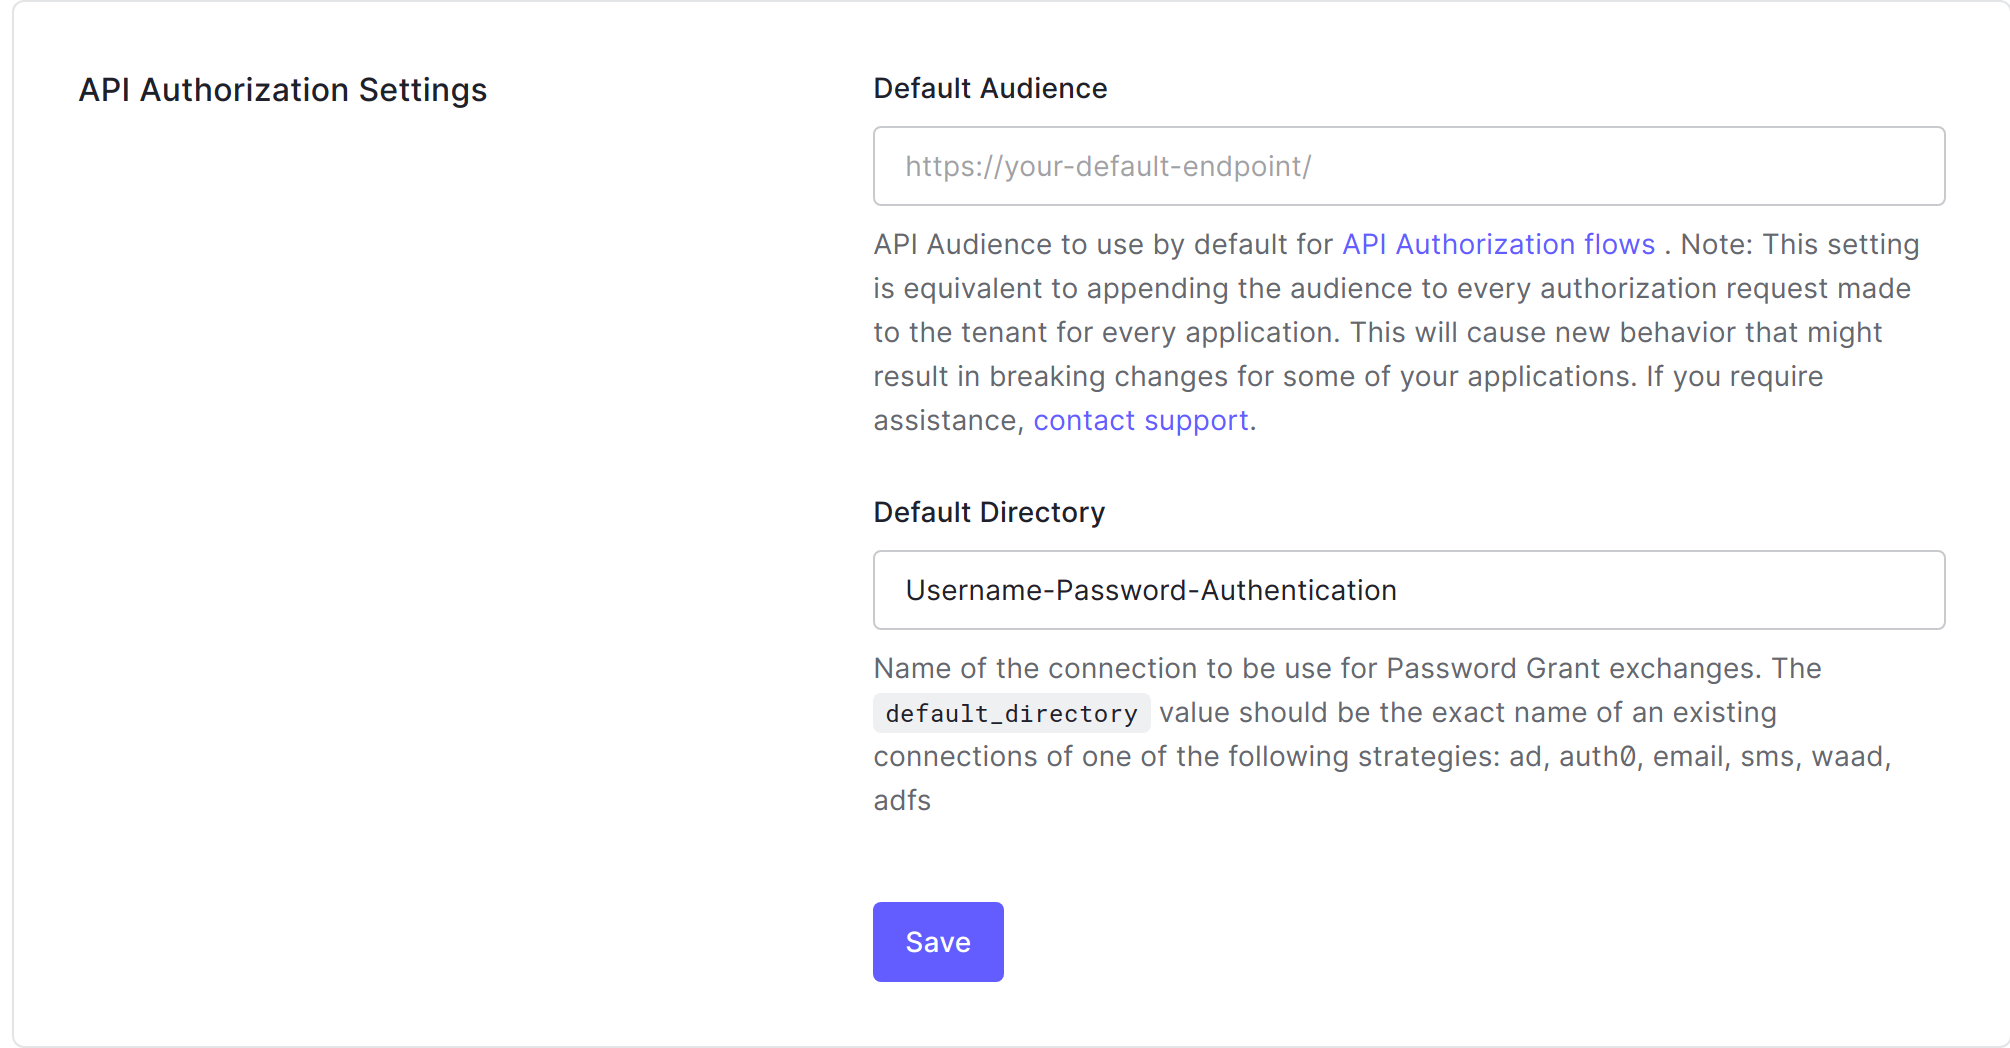 Updating default directory in Auth0 tenant settings